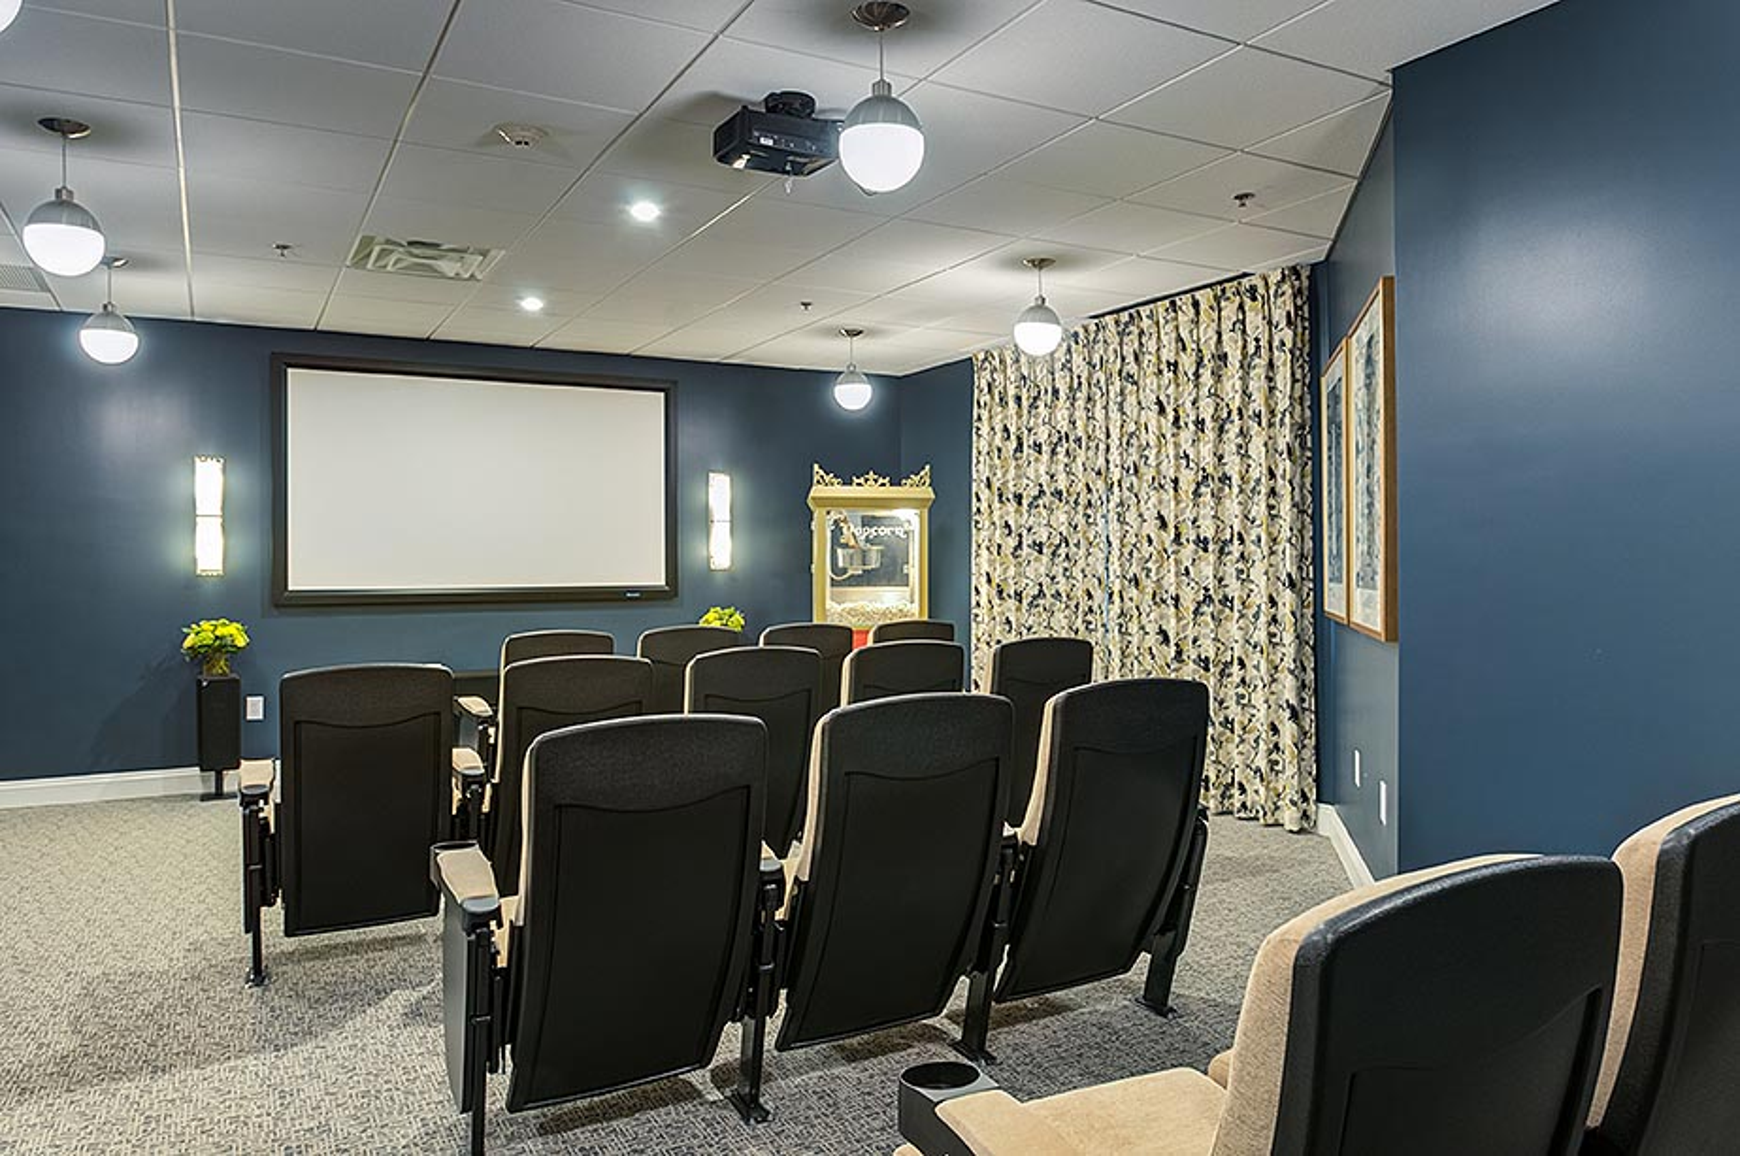 Cinema with widescreen TV and screening room seating